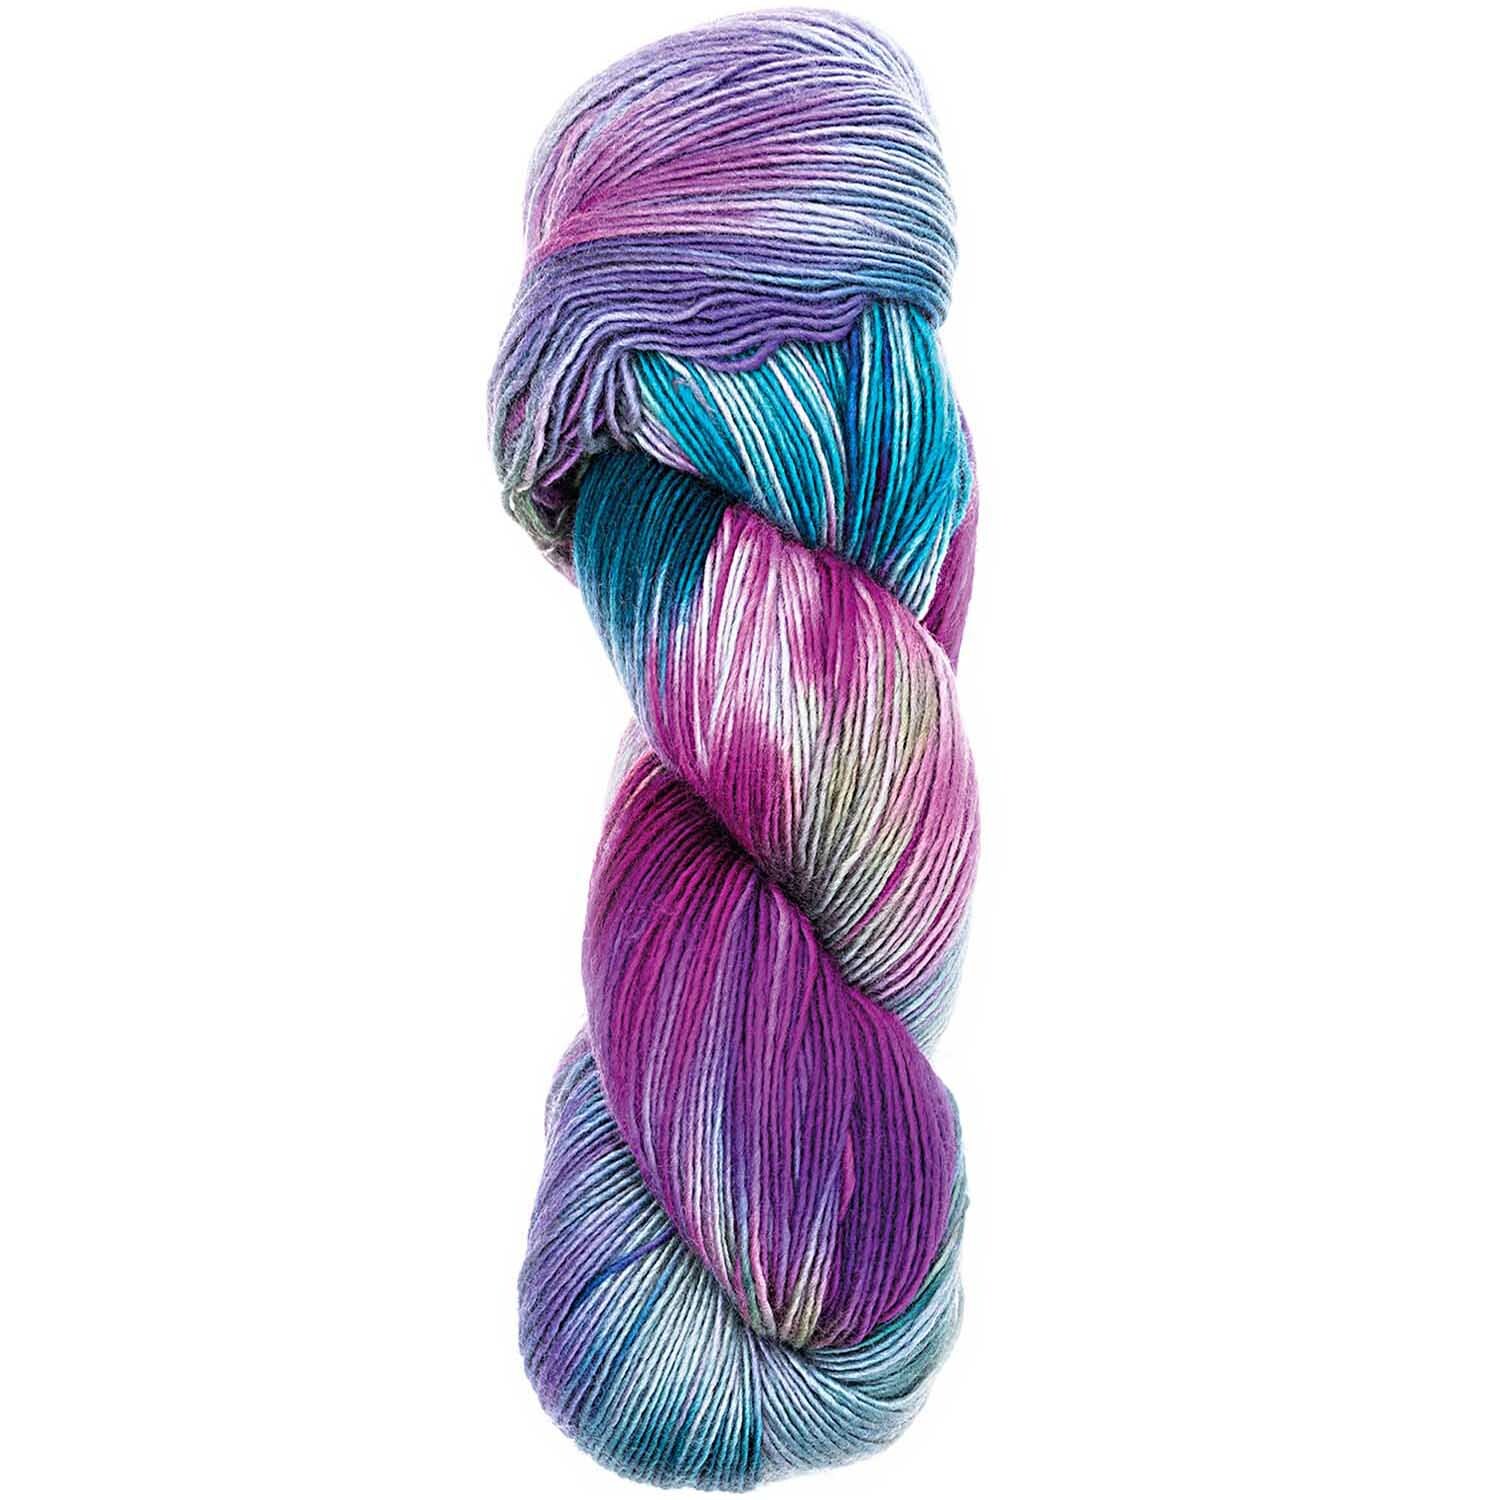 Luxury Hand-Dyed Happiness dk